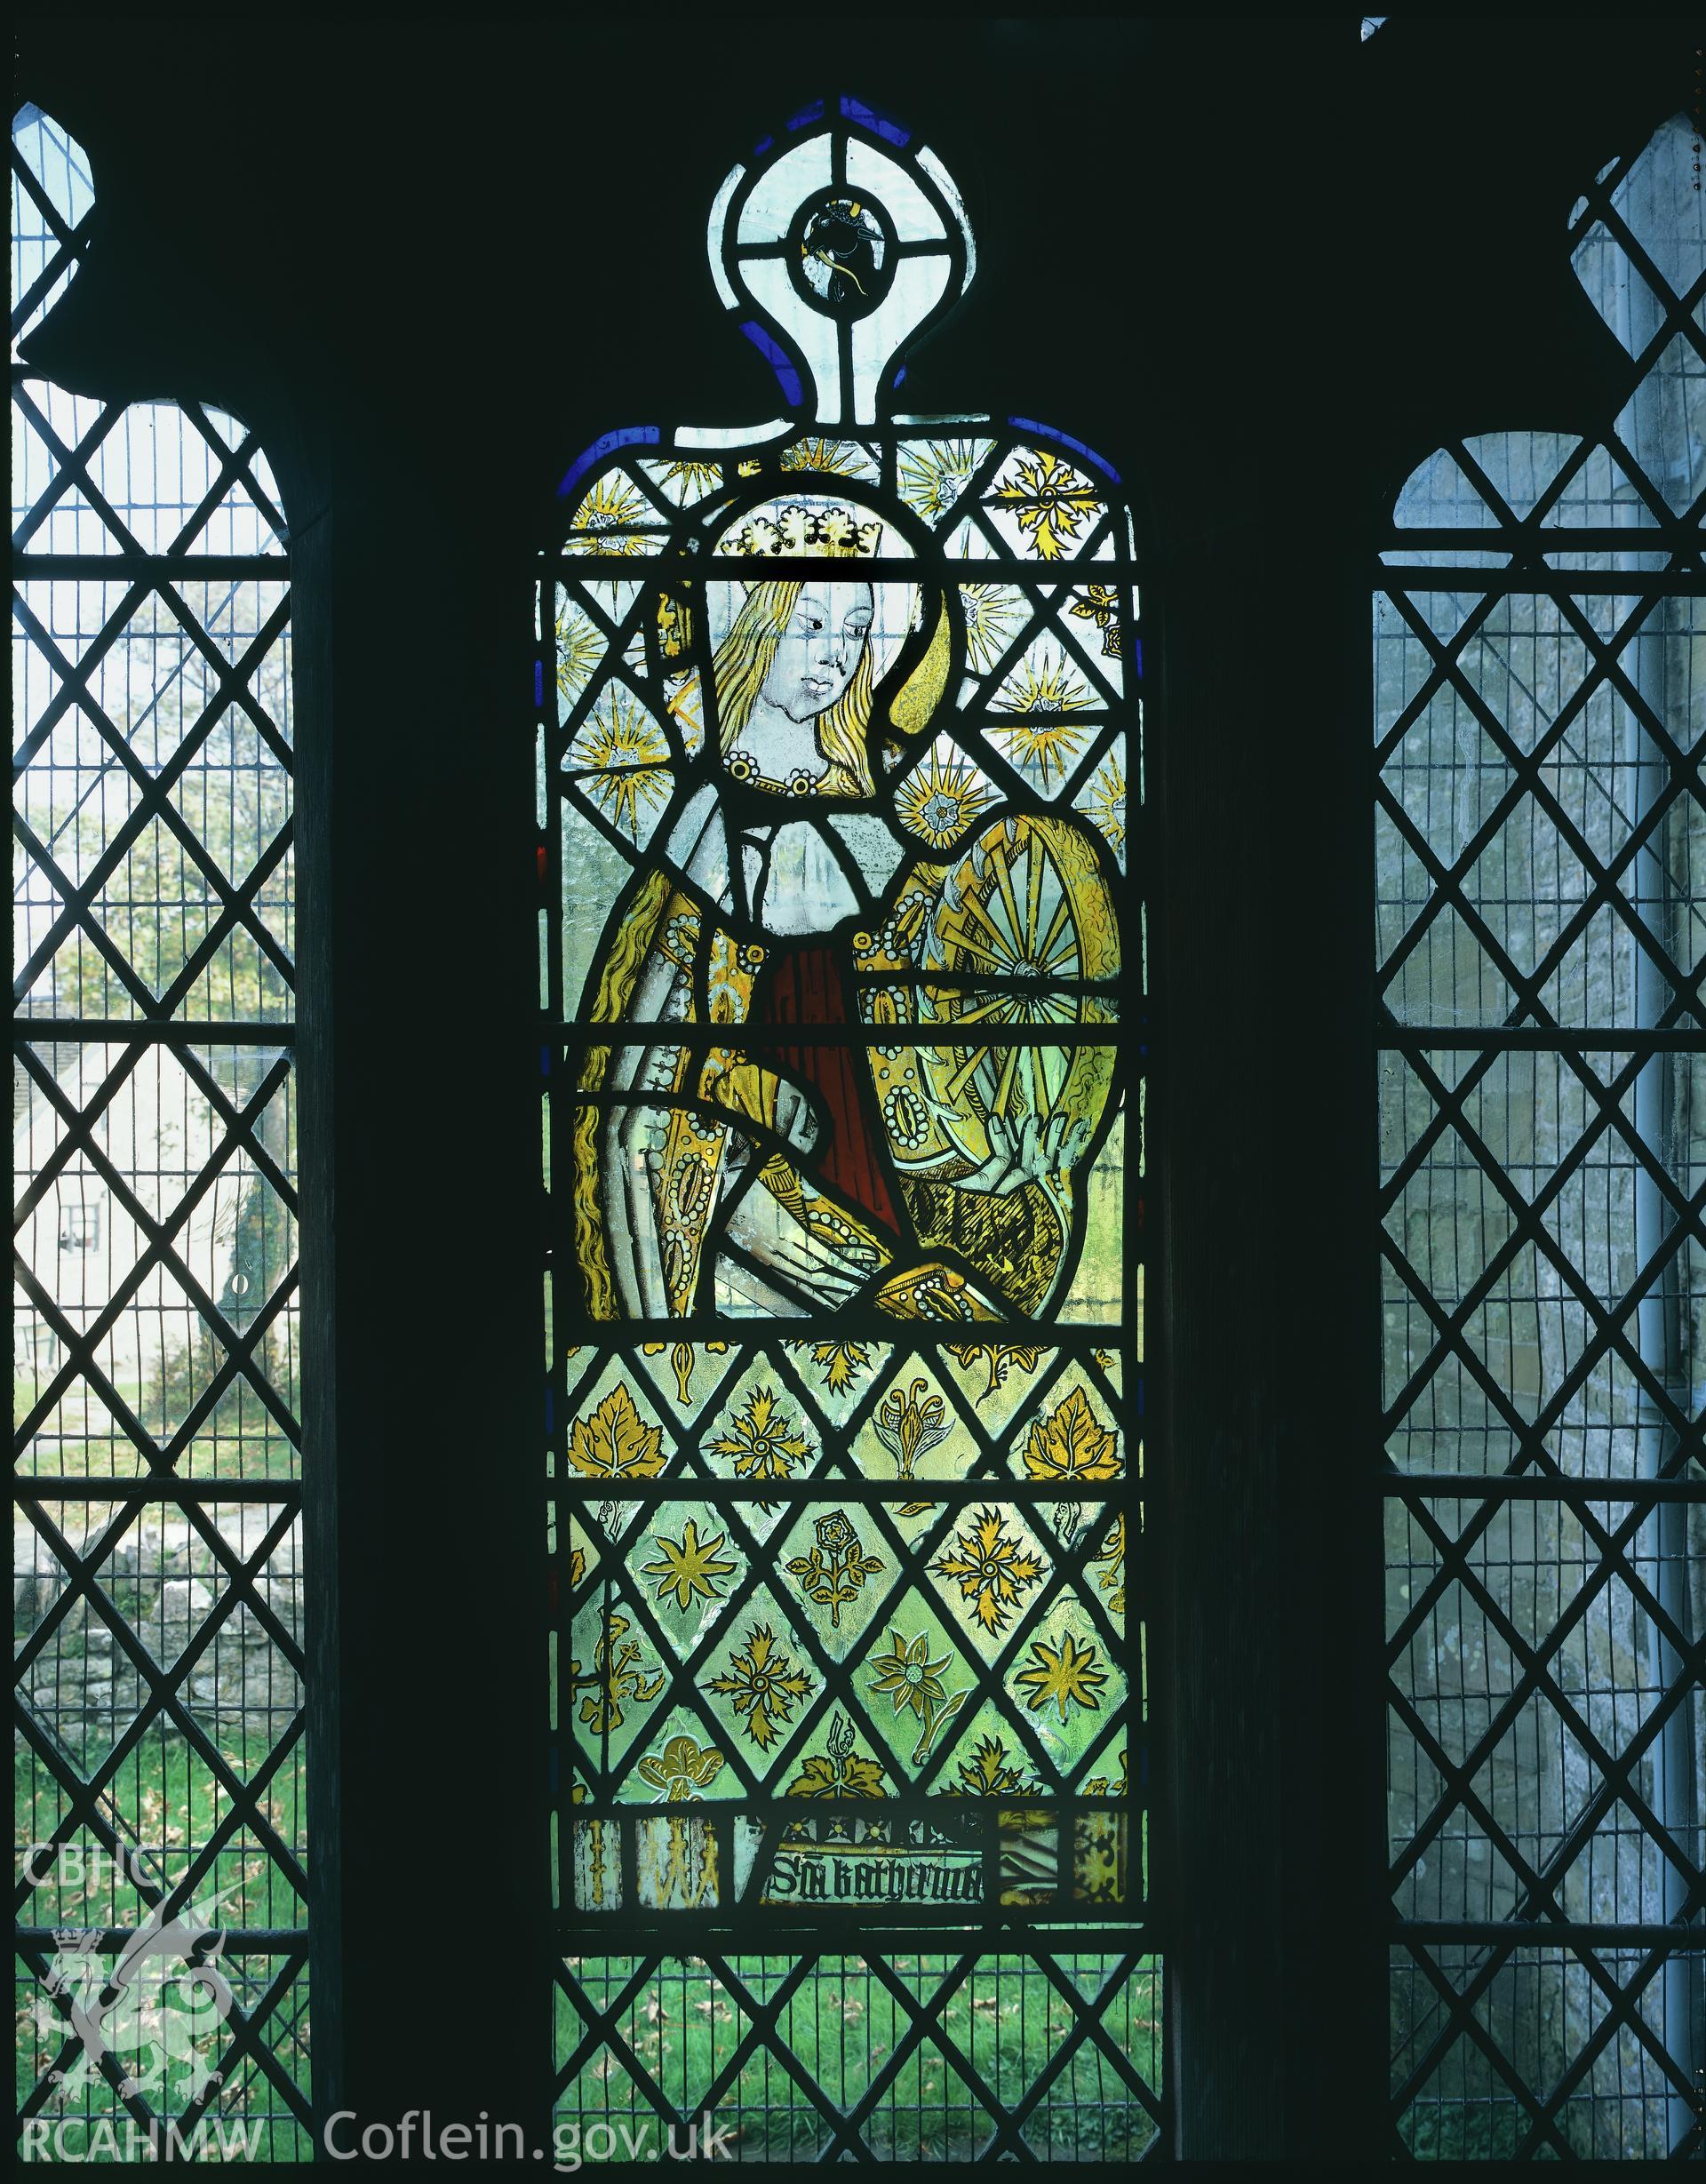 RCAHMW colour transparency of a stained glass window in Old Radnor Church, depicting St. Katherine.